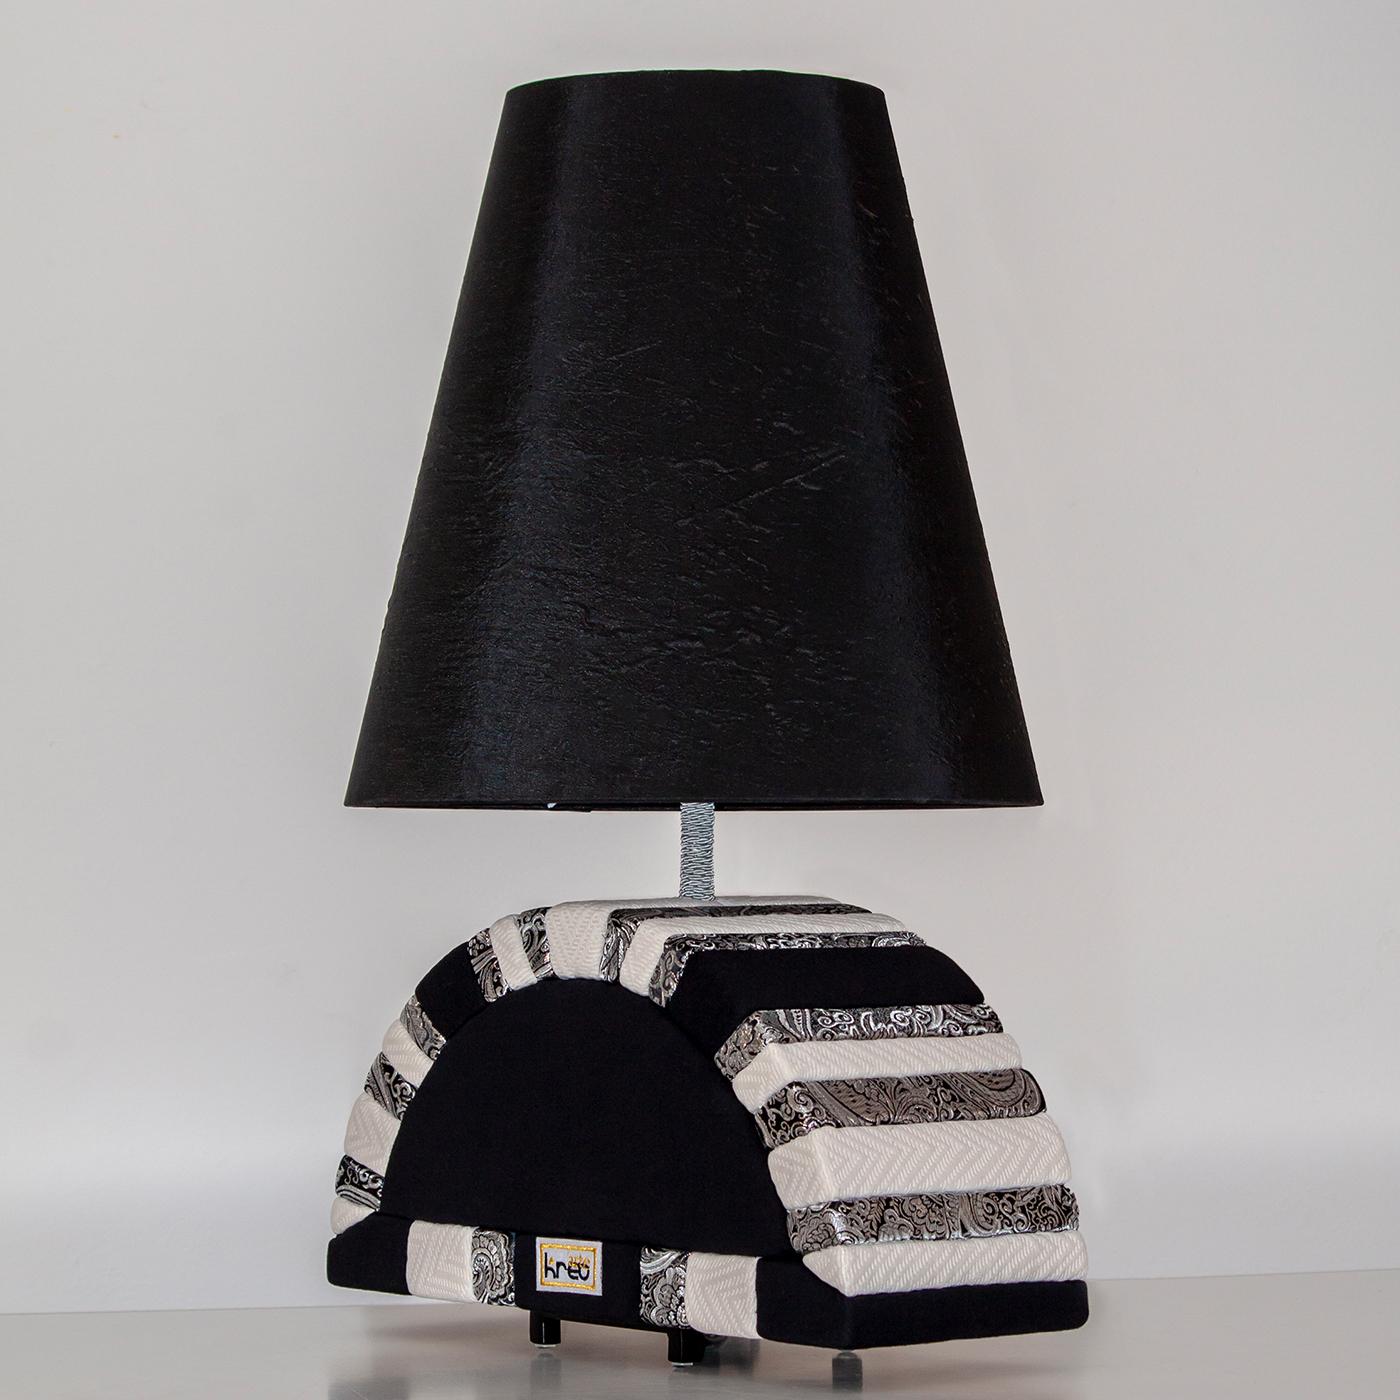 Paying tribute to their Sardinian heritage, designer Francesca Fiori created this exquisite table lamp featuring the distinctive geometric pattern of the 